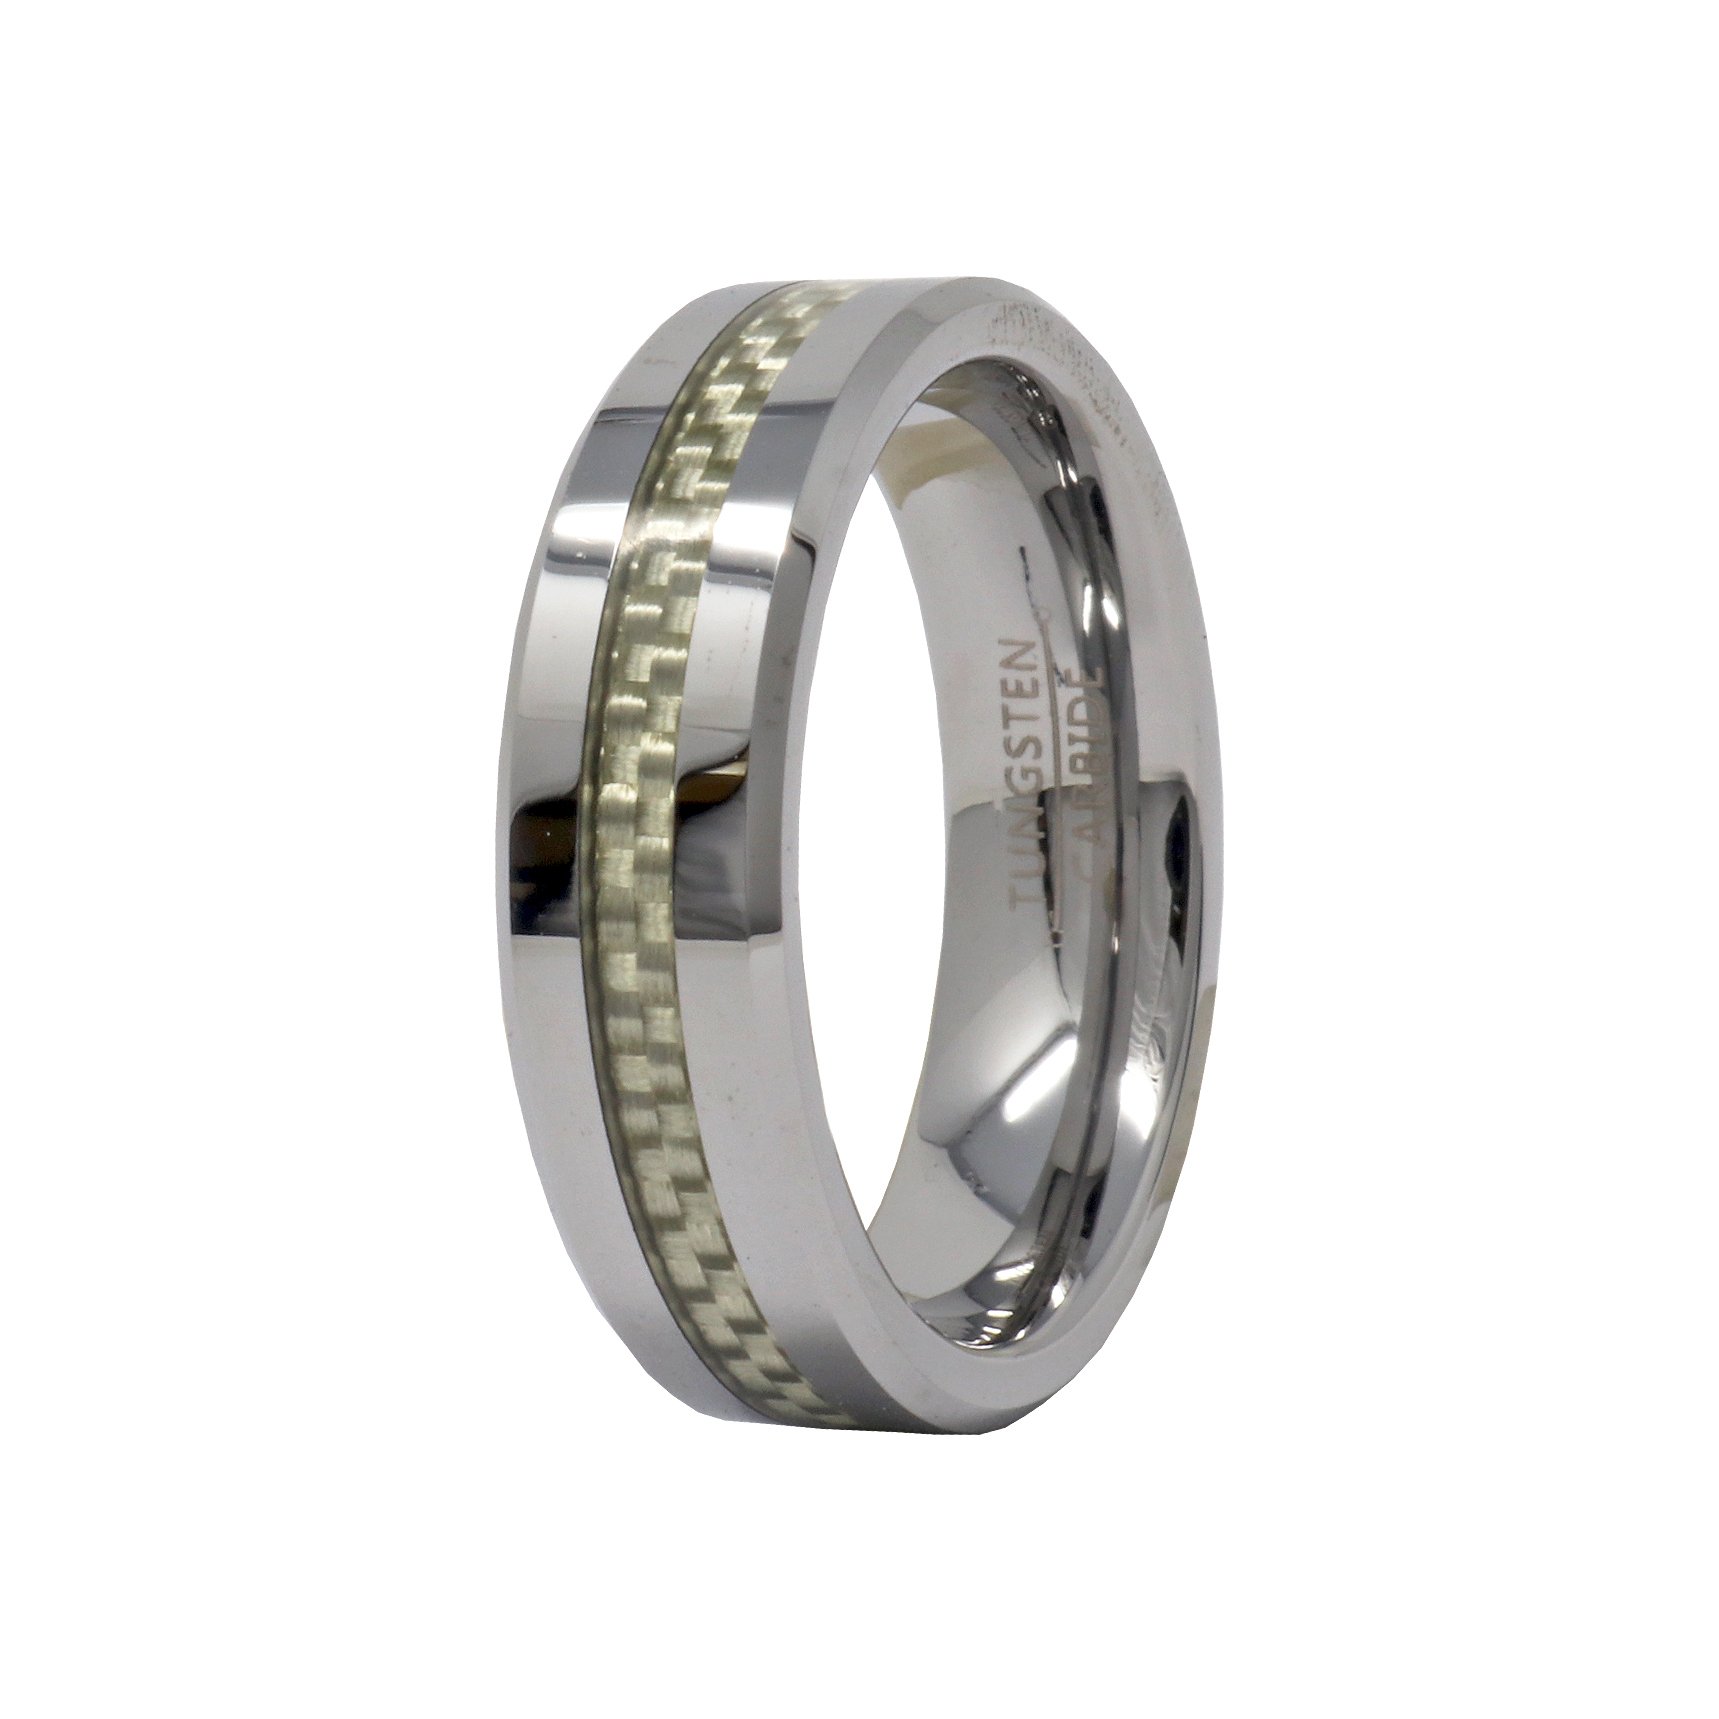 Tungsten Ring Size 11 - 6mm Gray Carbon Fiber Inlay